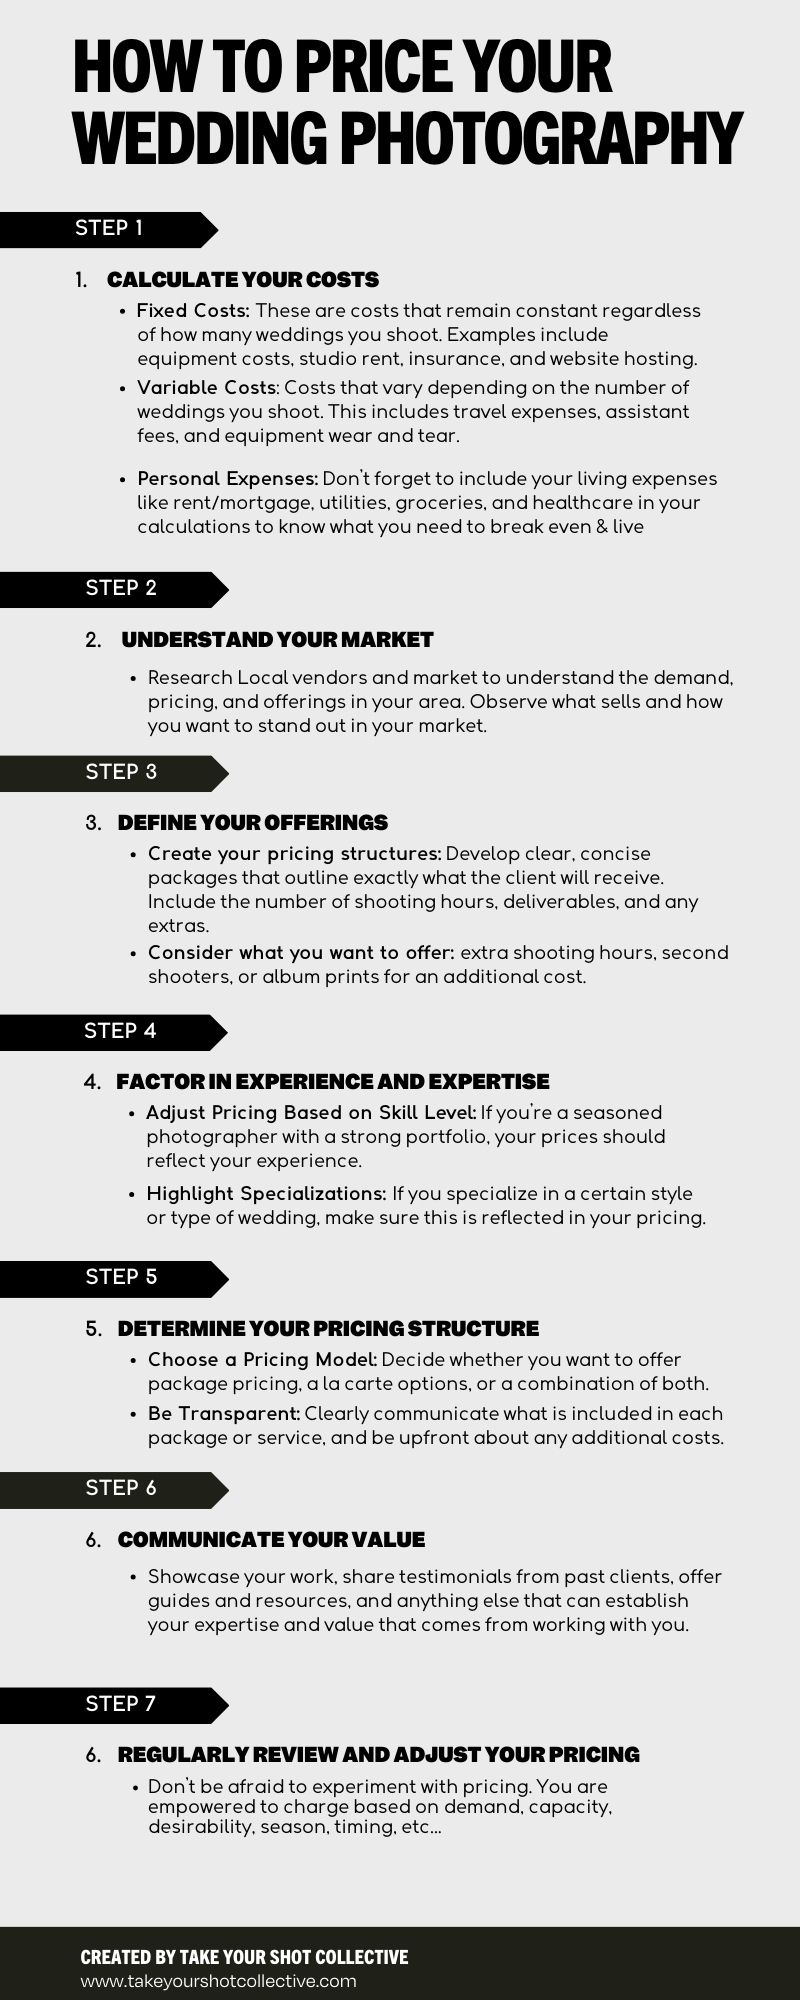 infographic about the seven steps on how to price your wedding photography business. 